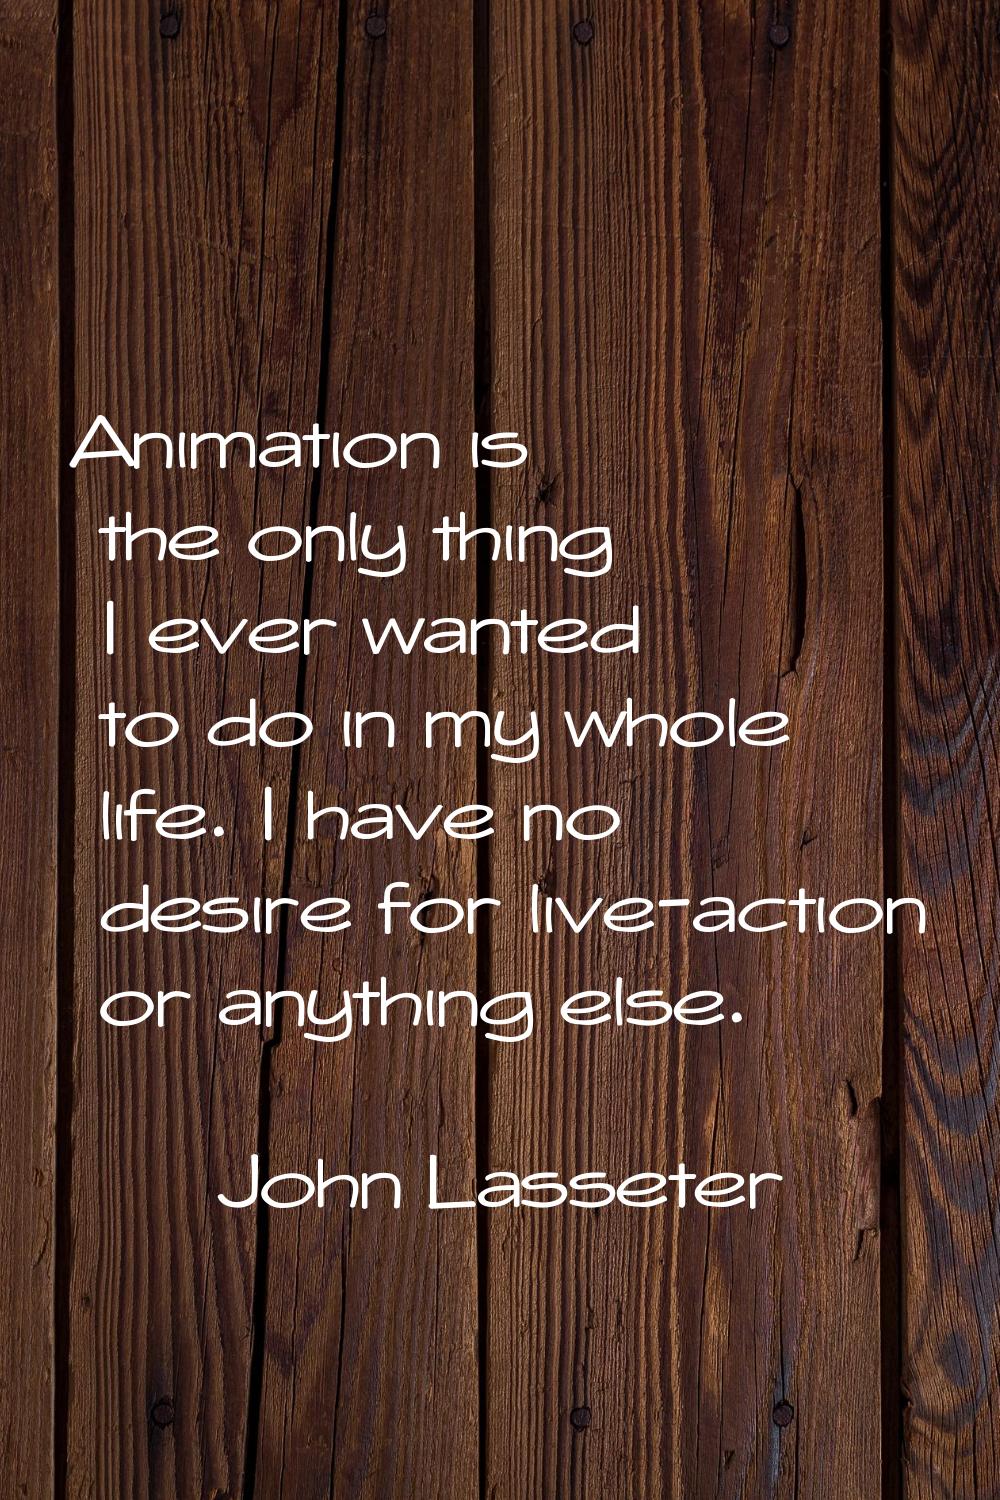 Animation is the only thing I ever wanted to do in my whole life. I have no desire for live-action 